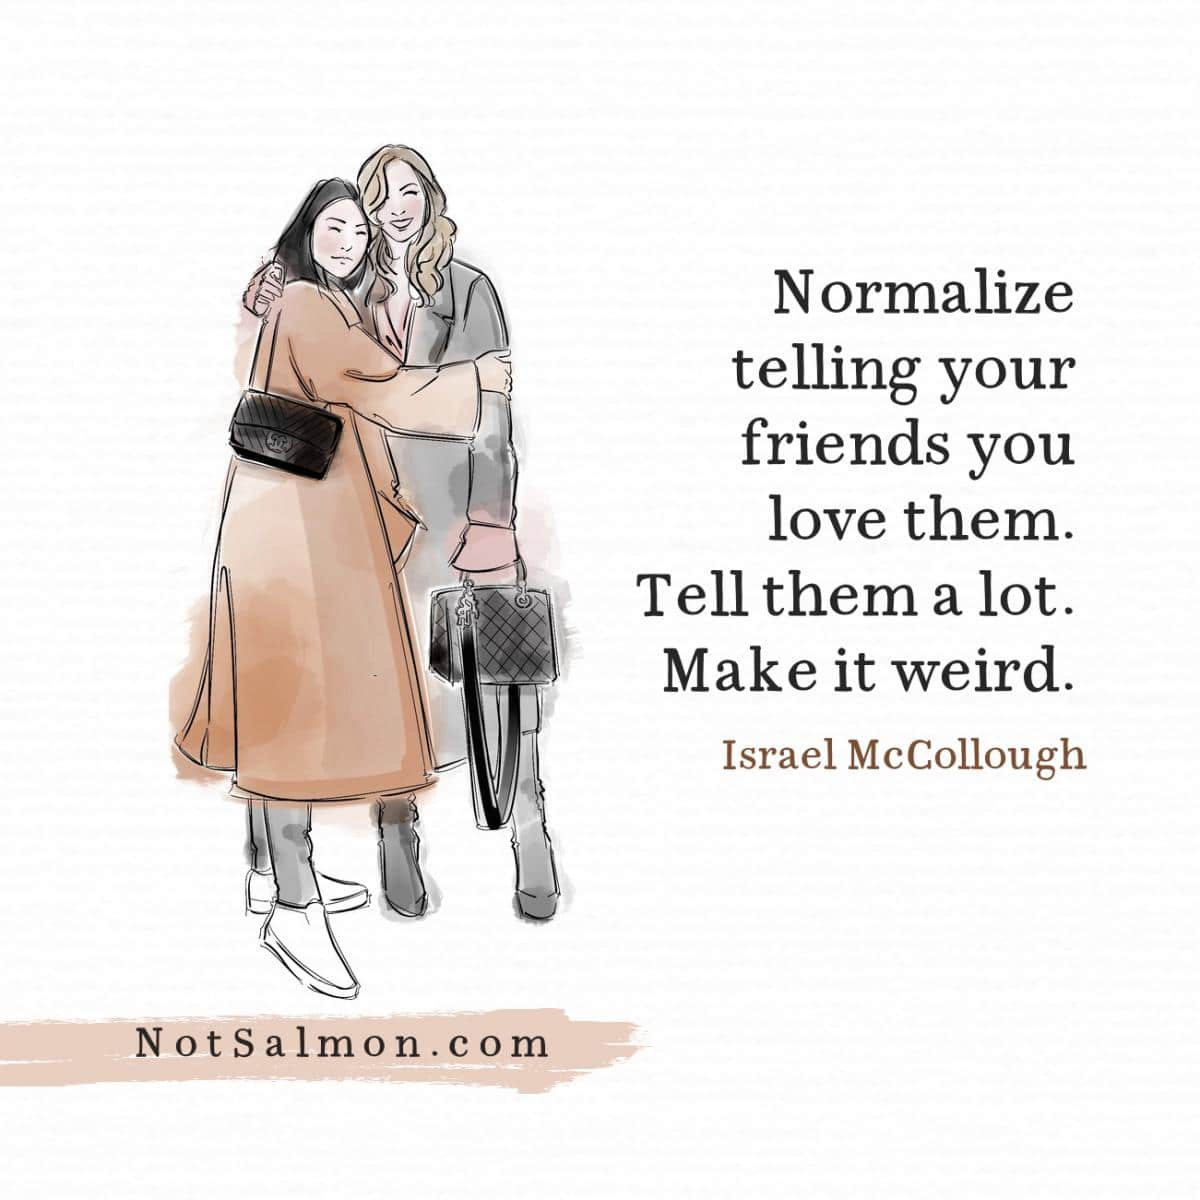 quote normalize telling your friends you love them. tell them a lot. make it weird.